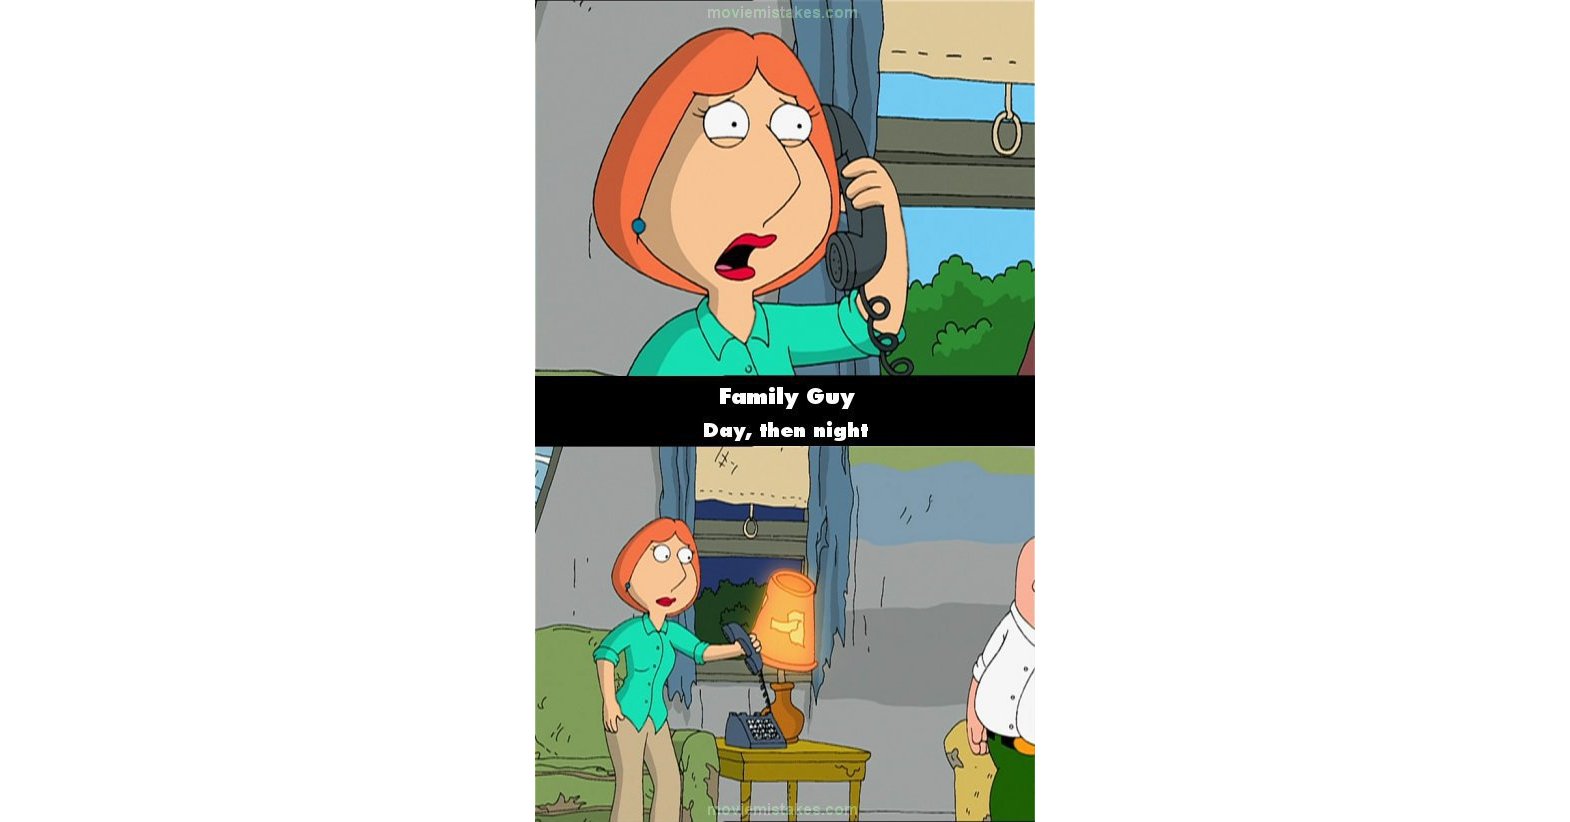 Family Guy (1999) TV mistake picture (ID 178982)